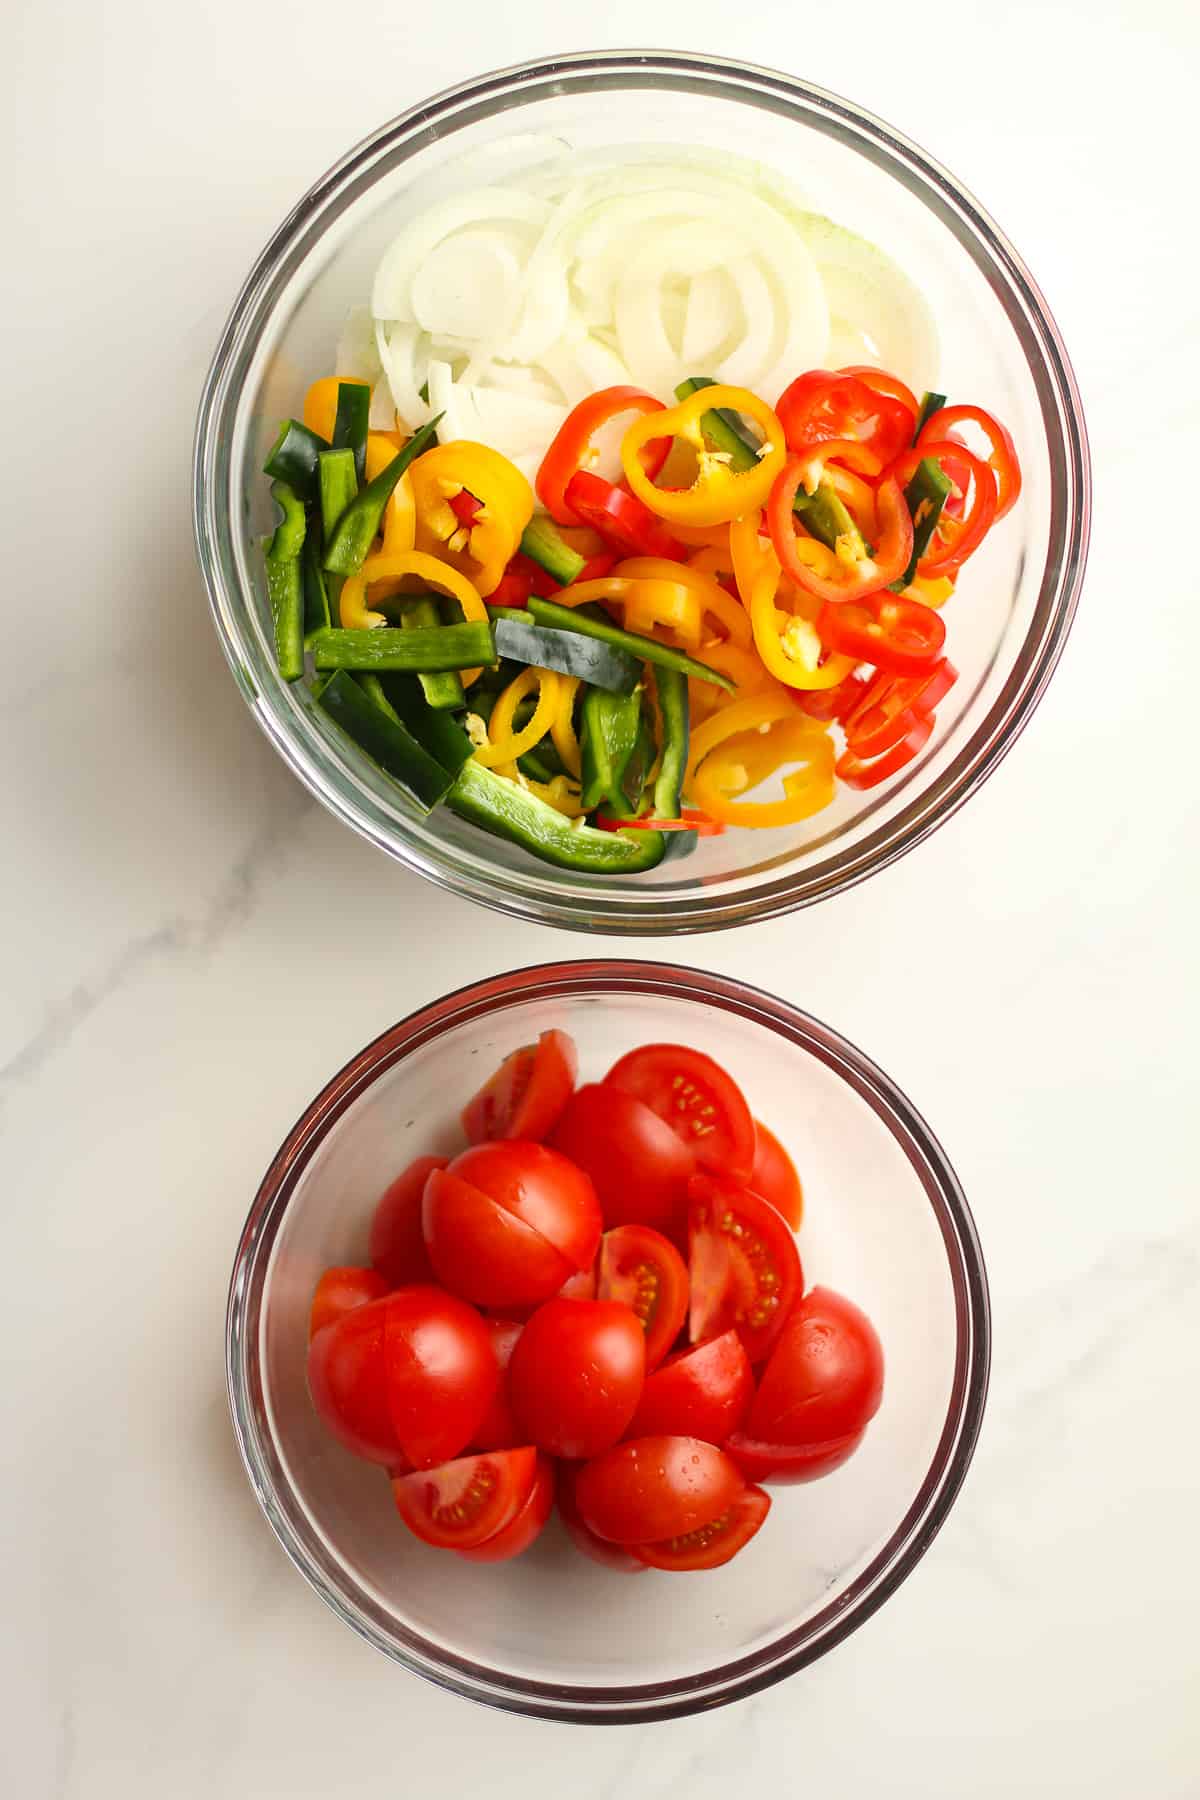 A bowl of the sliced peppers and onions, and another bowl of the chopped tomatoes.